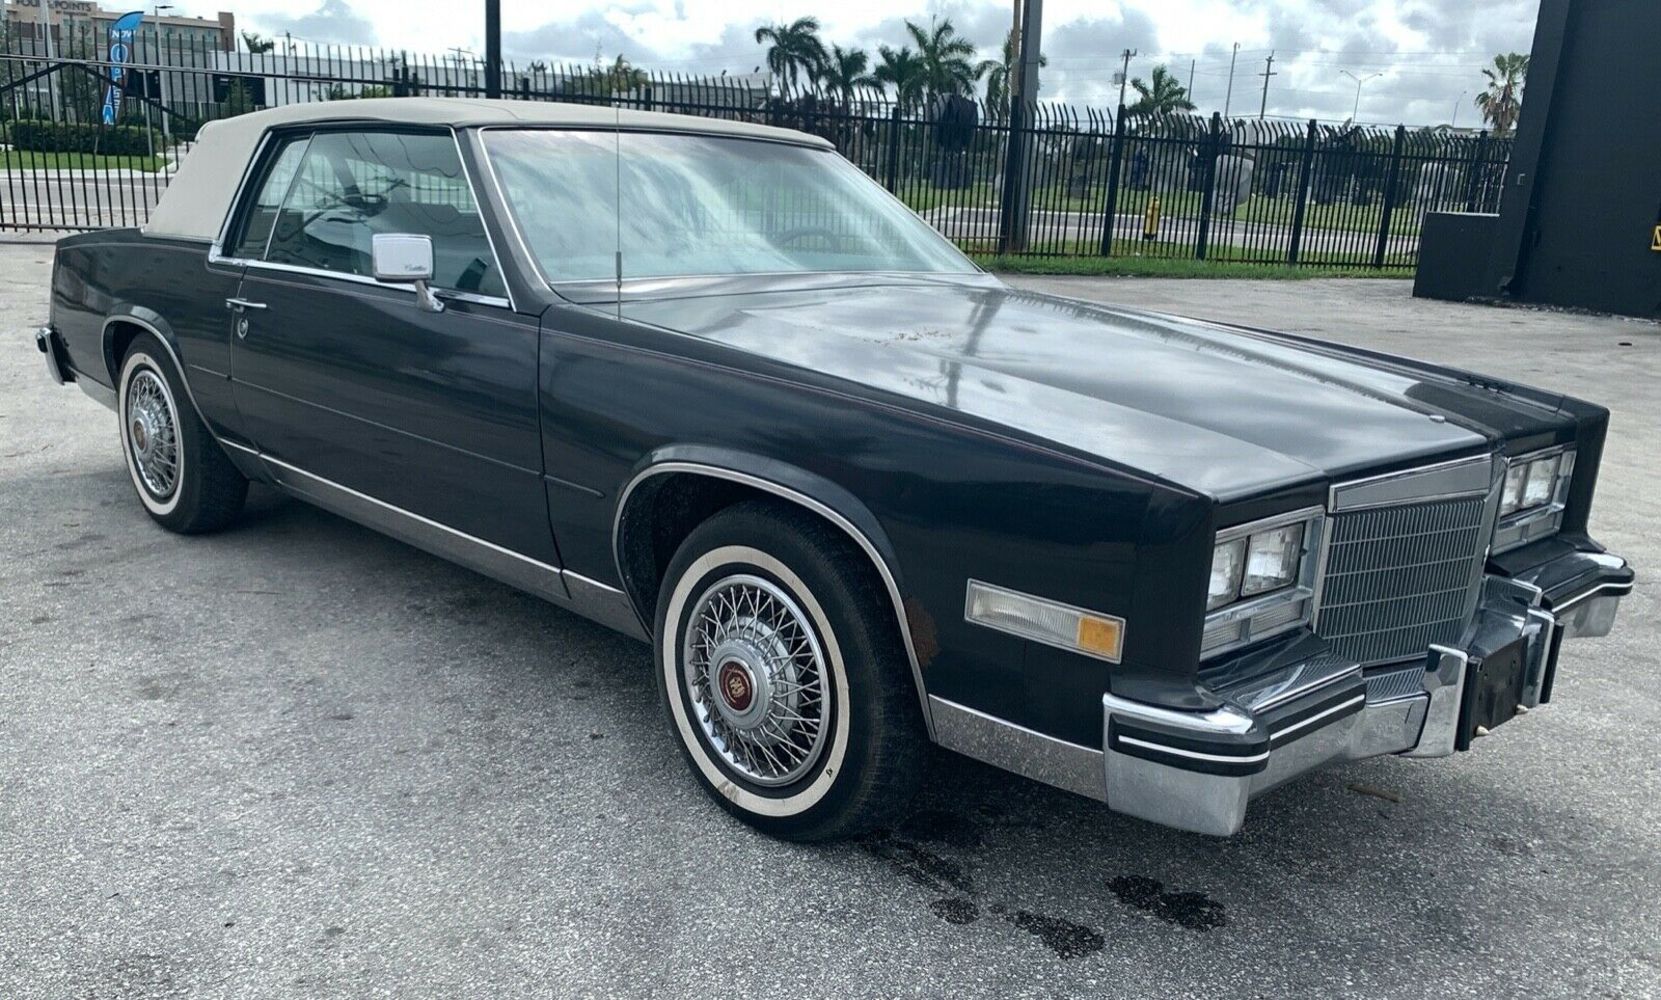 Electronics, Furniture Showroom Miami: 1985 Cadillac, Dry Cleaning Equipment